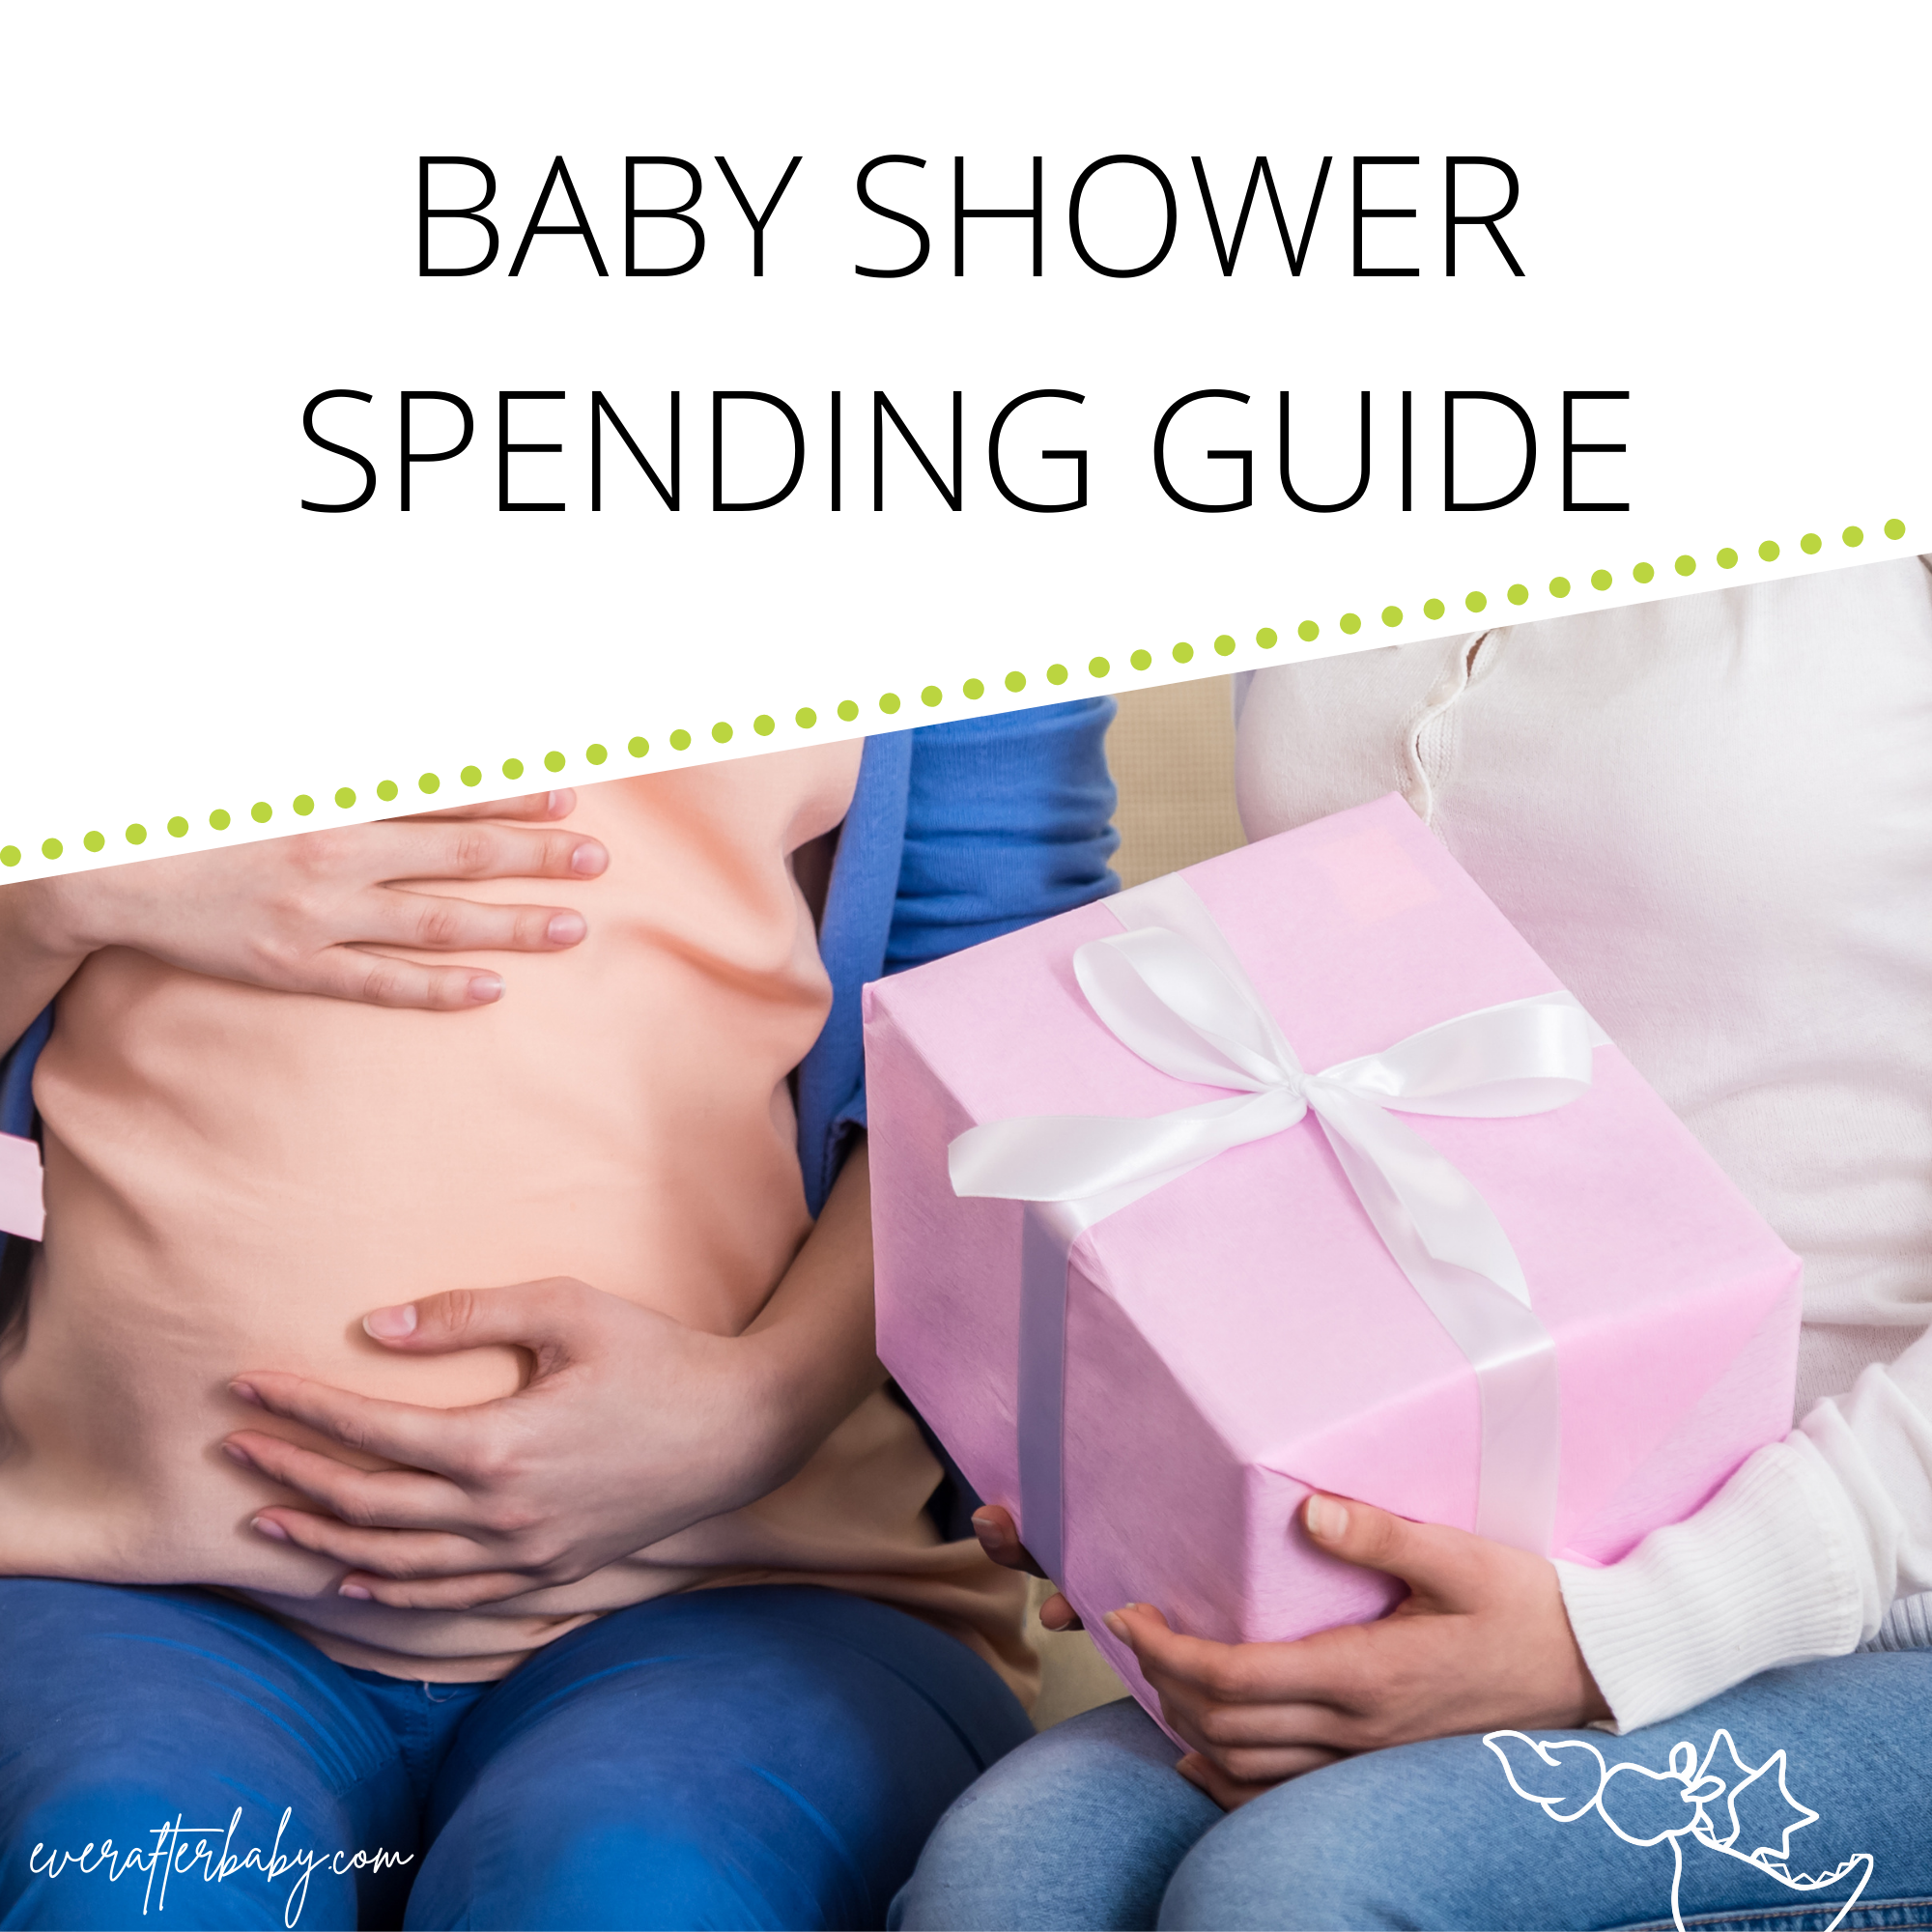 How much for a baby shower gift? Our Spending Guide